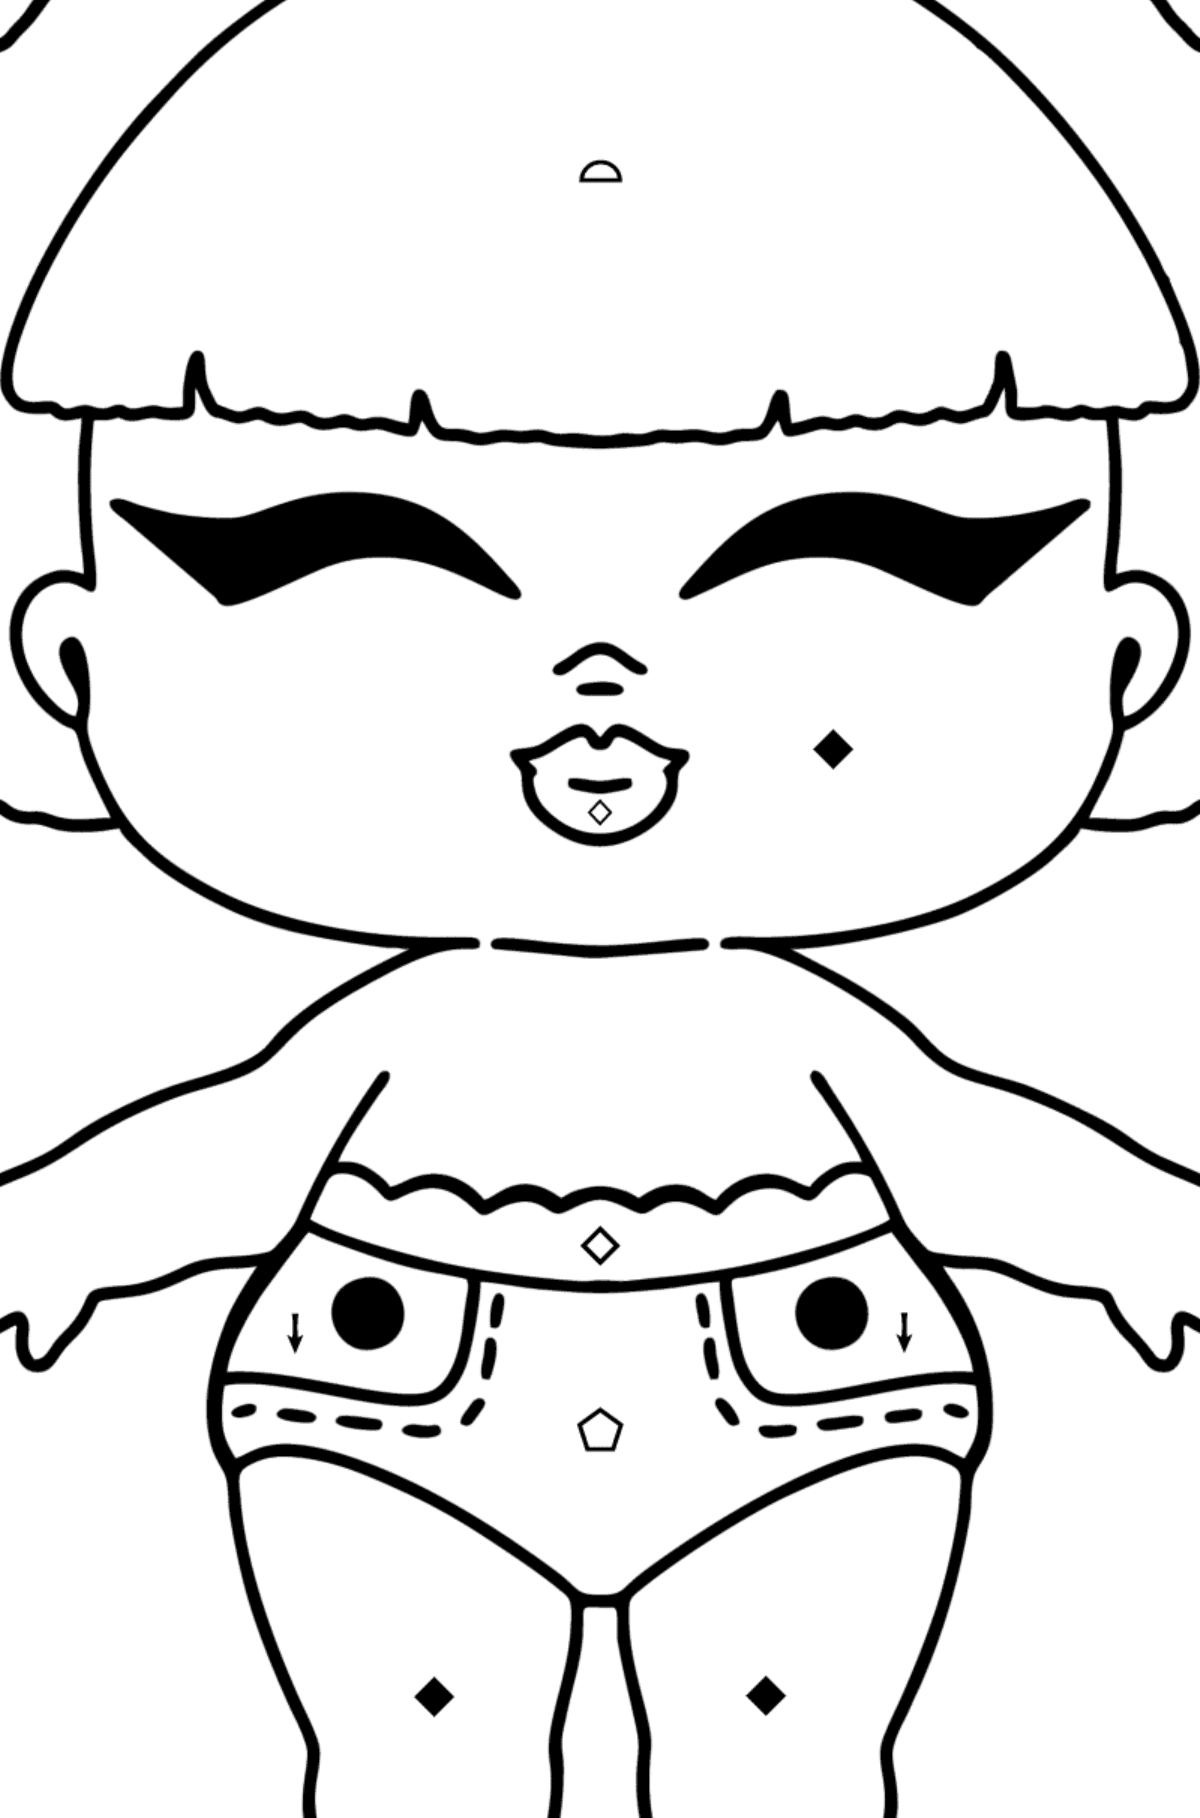 LOL Surprise Lil Pranksta coloring page - Coloring by Symbols and Geometric Shapes for Kids